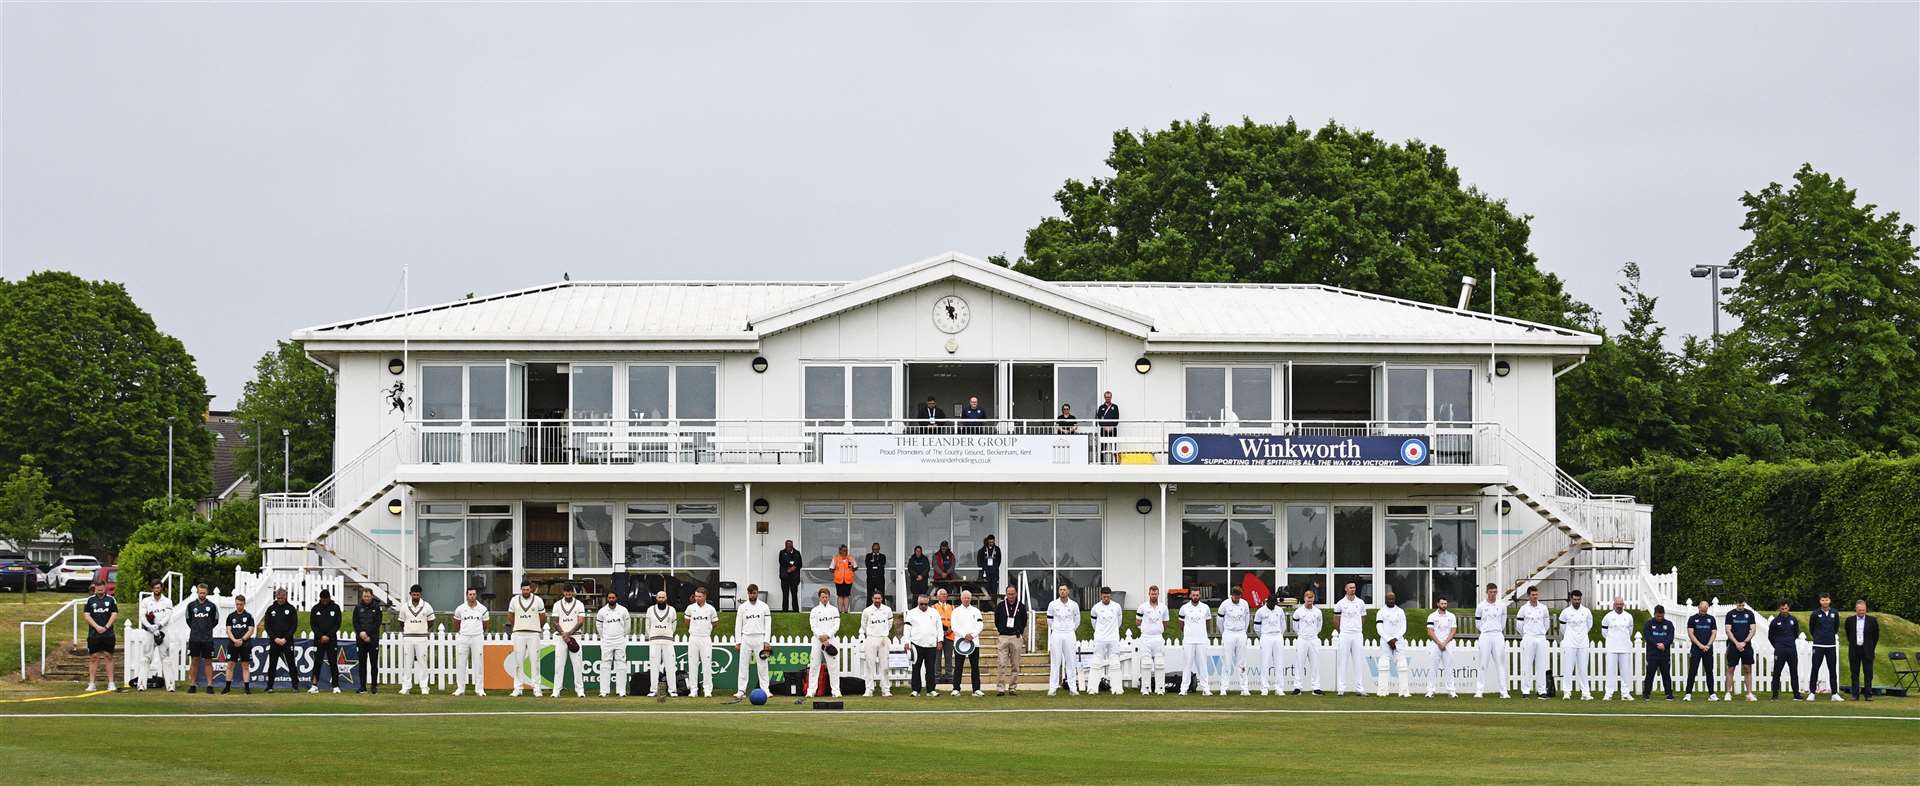 Kent and Surrey players marked the death of Australian cricketer and former Kent player Andrew Symonds with a minute's silence before their LV= Insurance County Championship game today at the County Ground, Beckenham